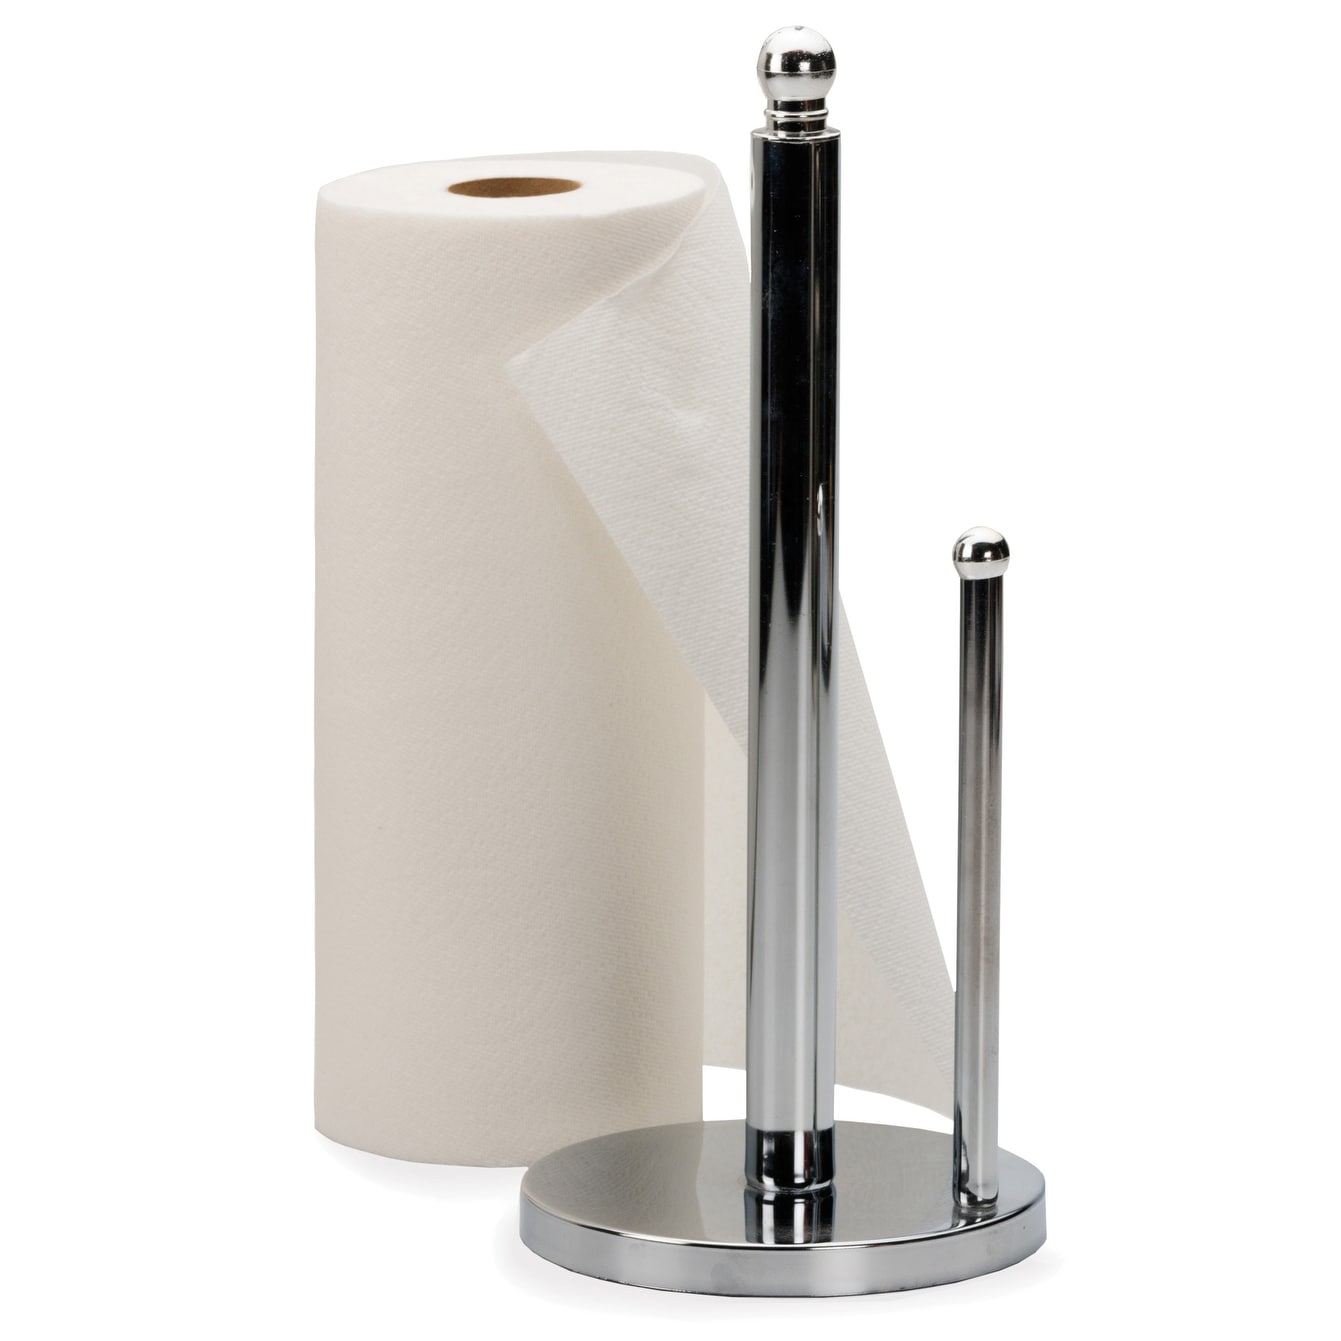 https://ak1.ostkcdn.com/images/products/is/images/direct/016f457eed62f2d3c4b26cd3c429890e9ccead2b/Chrome-Paper-Towel-Holder.jpg